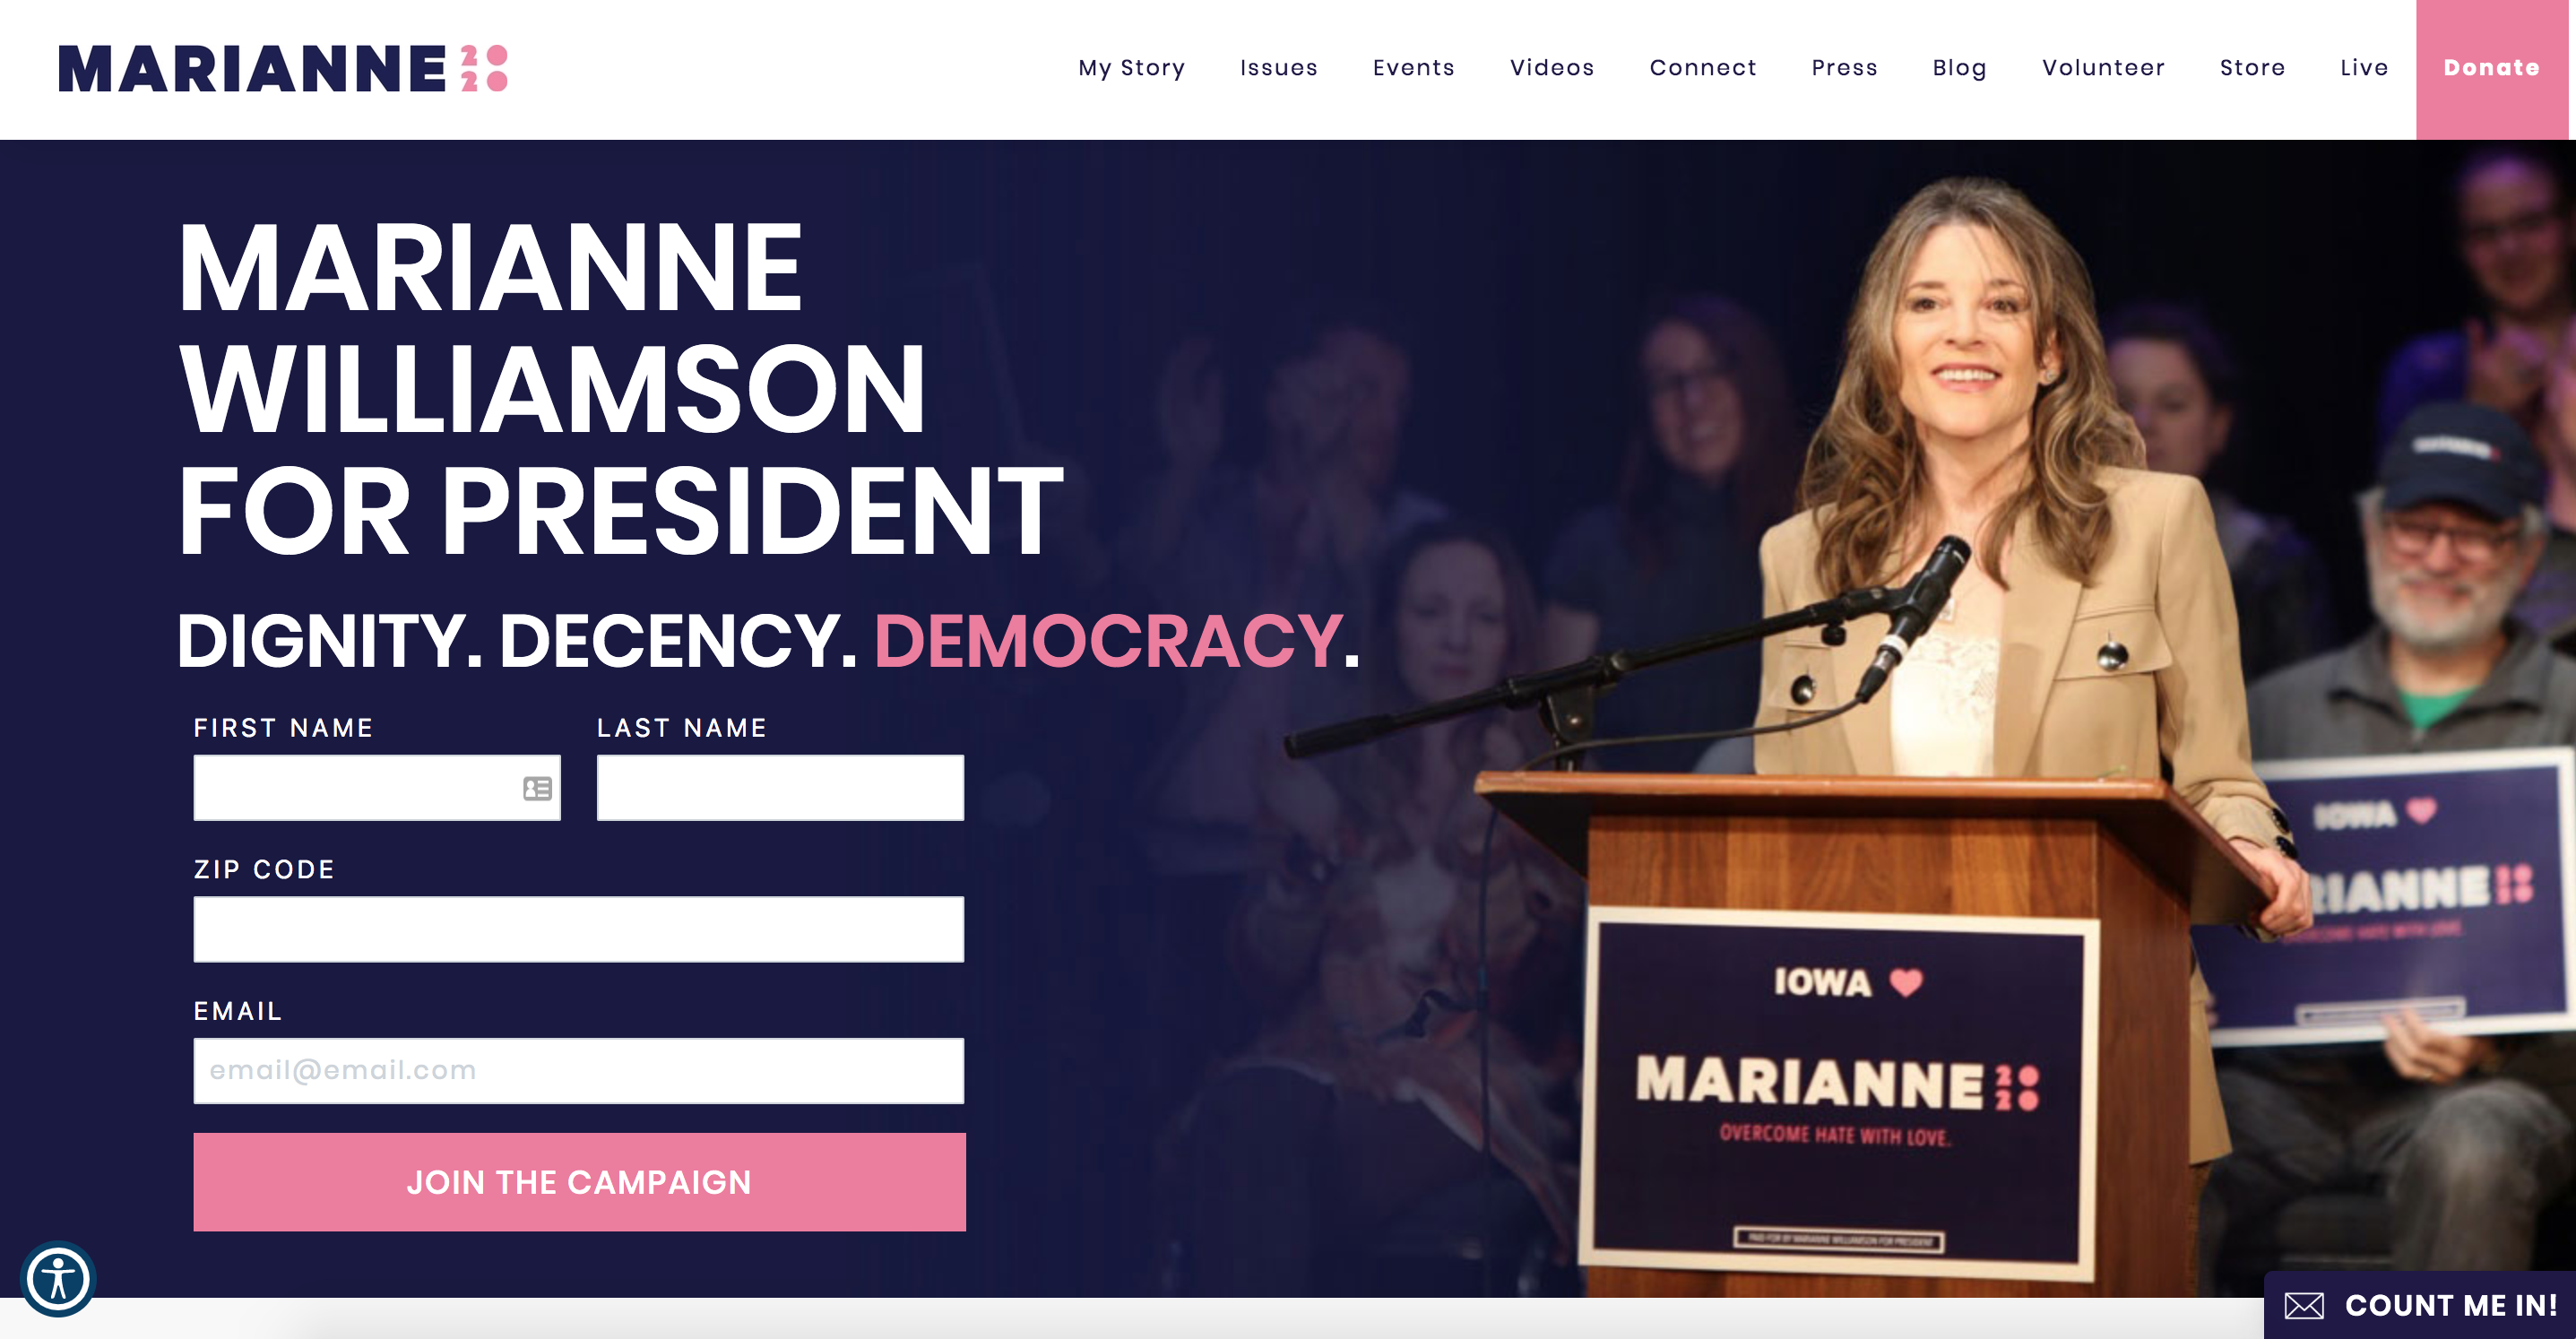 Marianne's on-brand website for the 2020 US Presidential Campaign